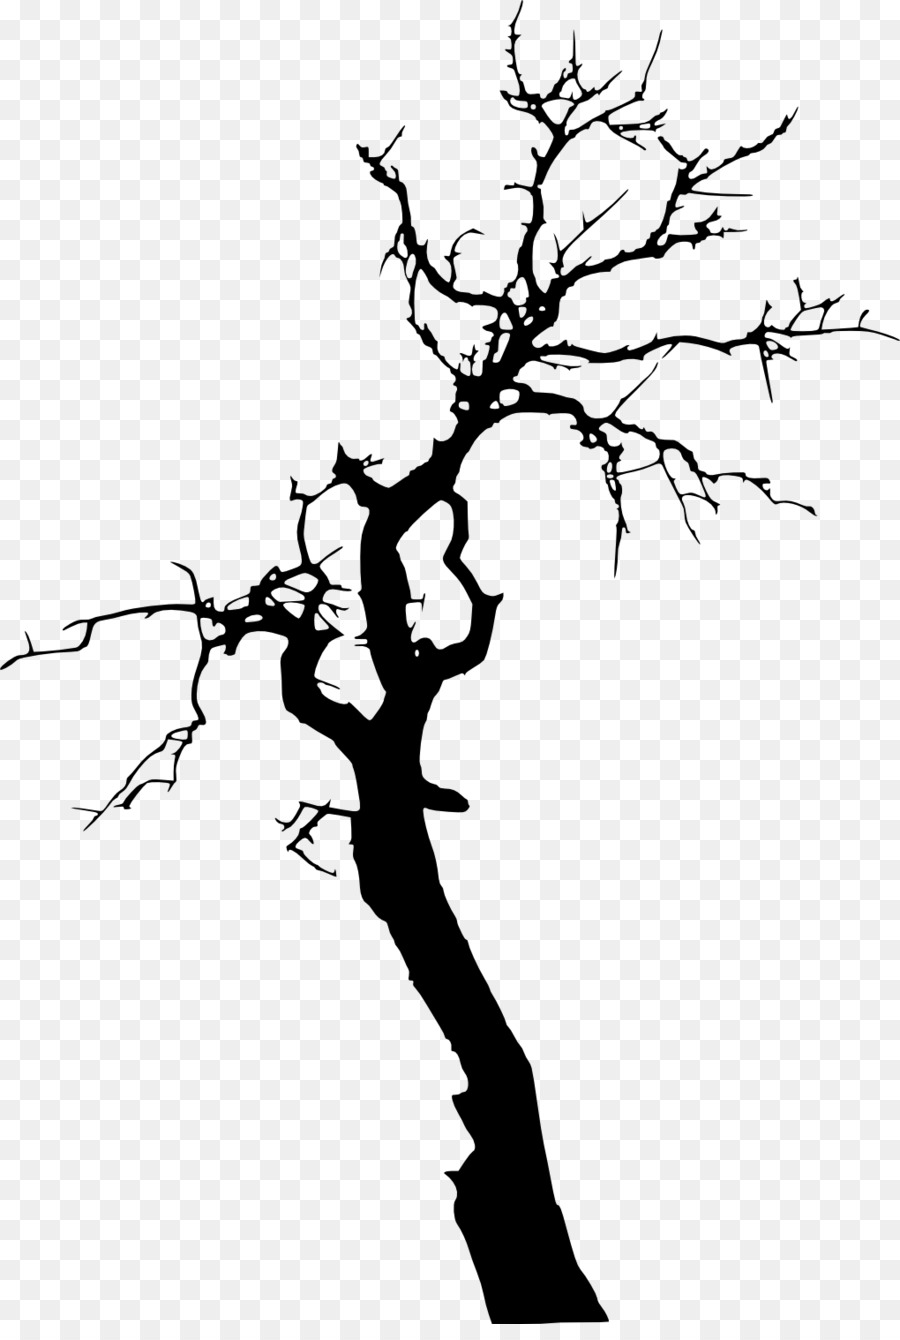 Tree Woody plant Clip art - dead tree png download - 748*1500 - Free ...